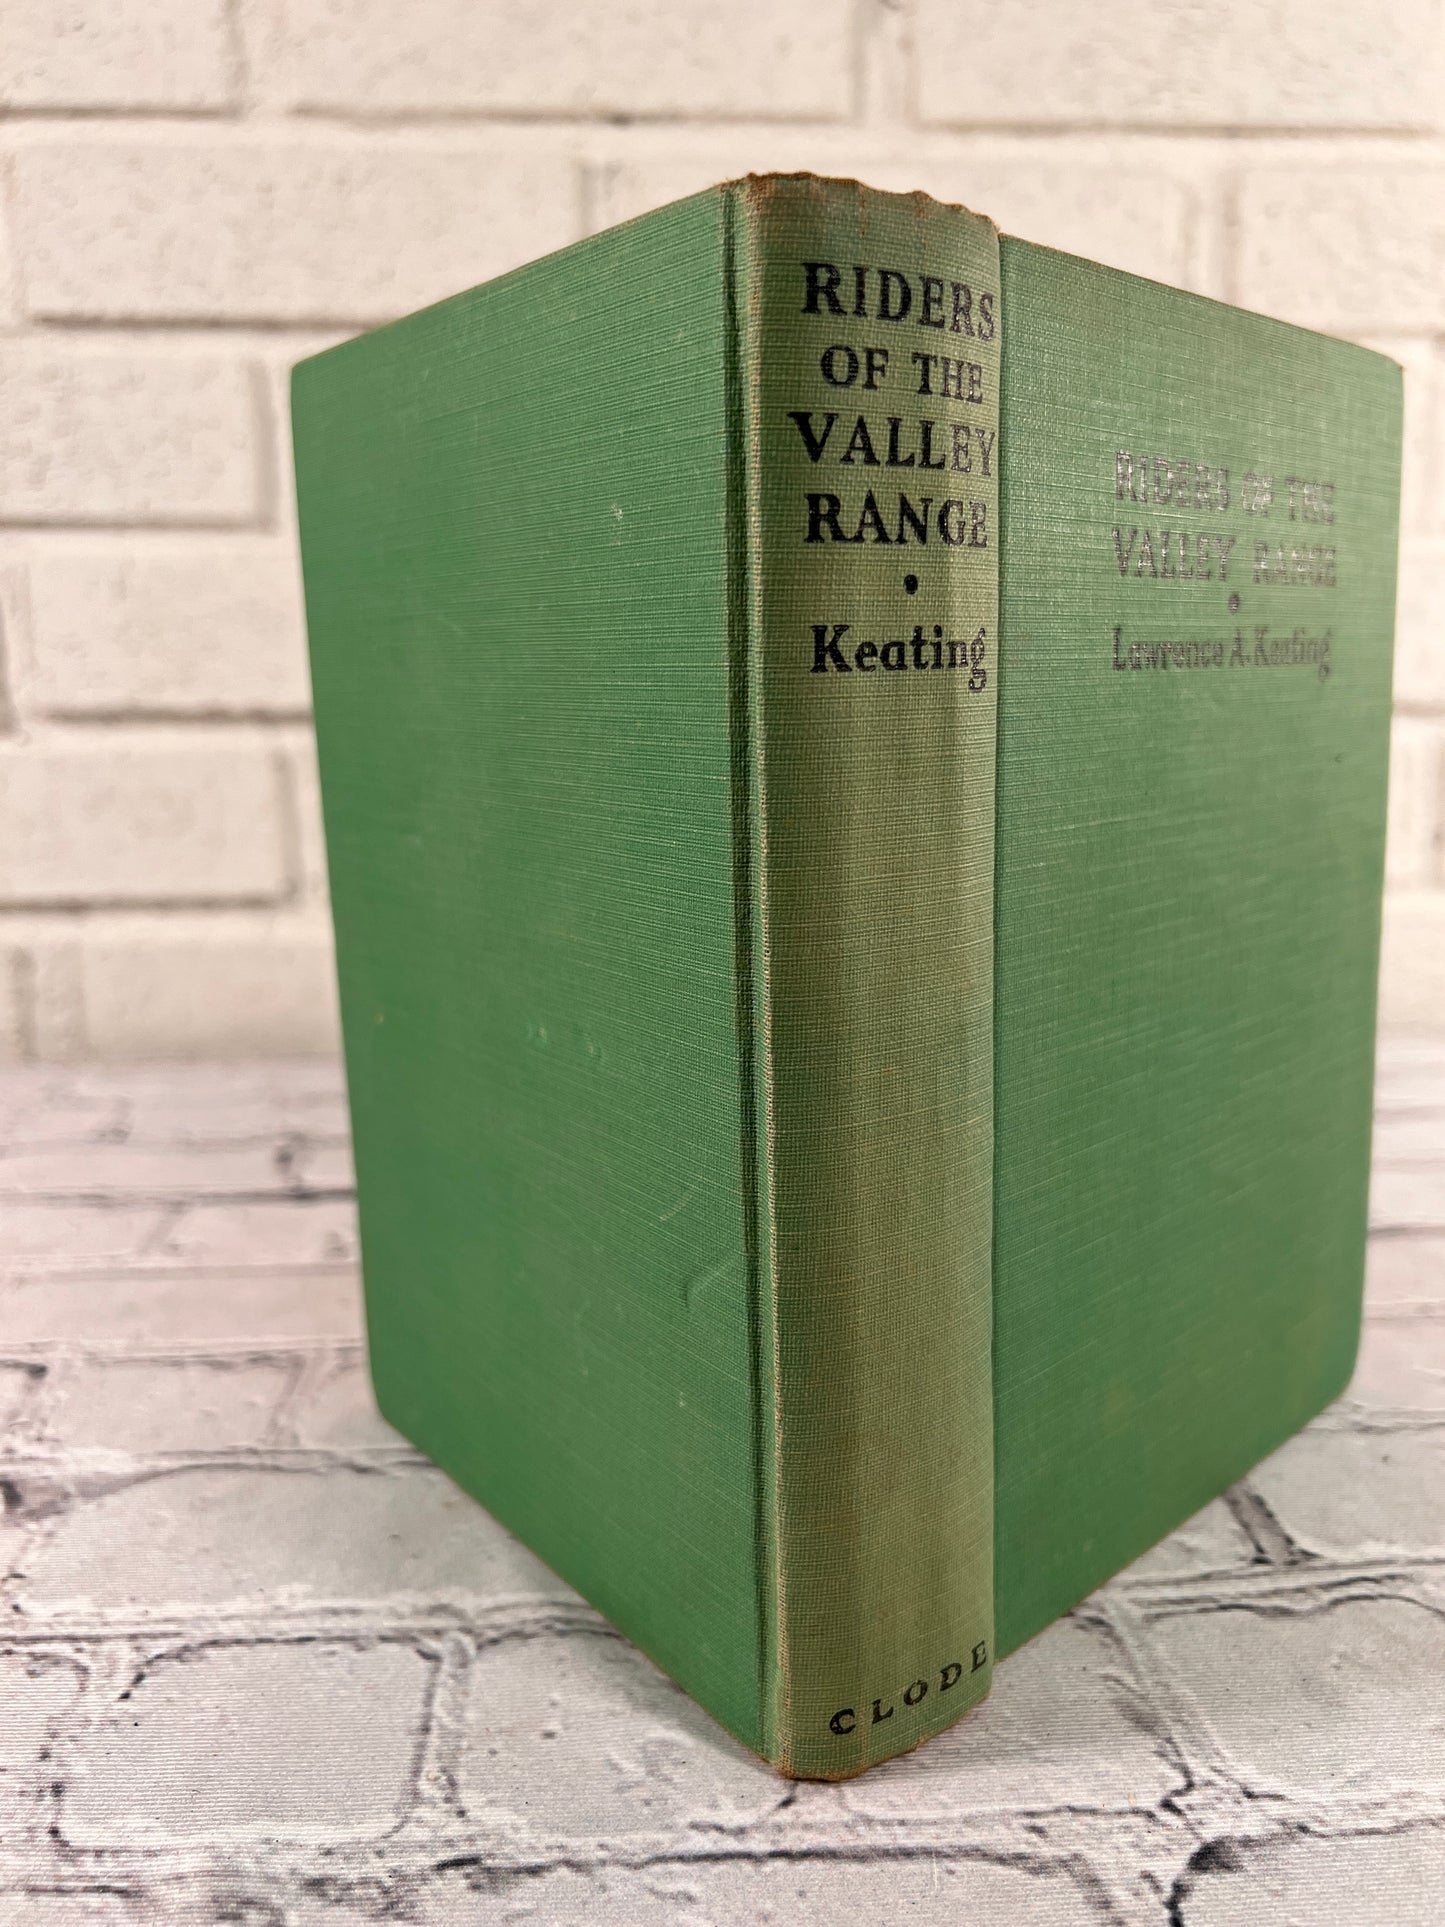 Riders of the Valley Range by Lawrence A. Keating [1932]